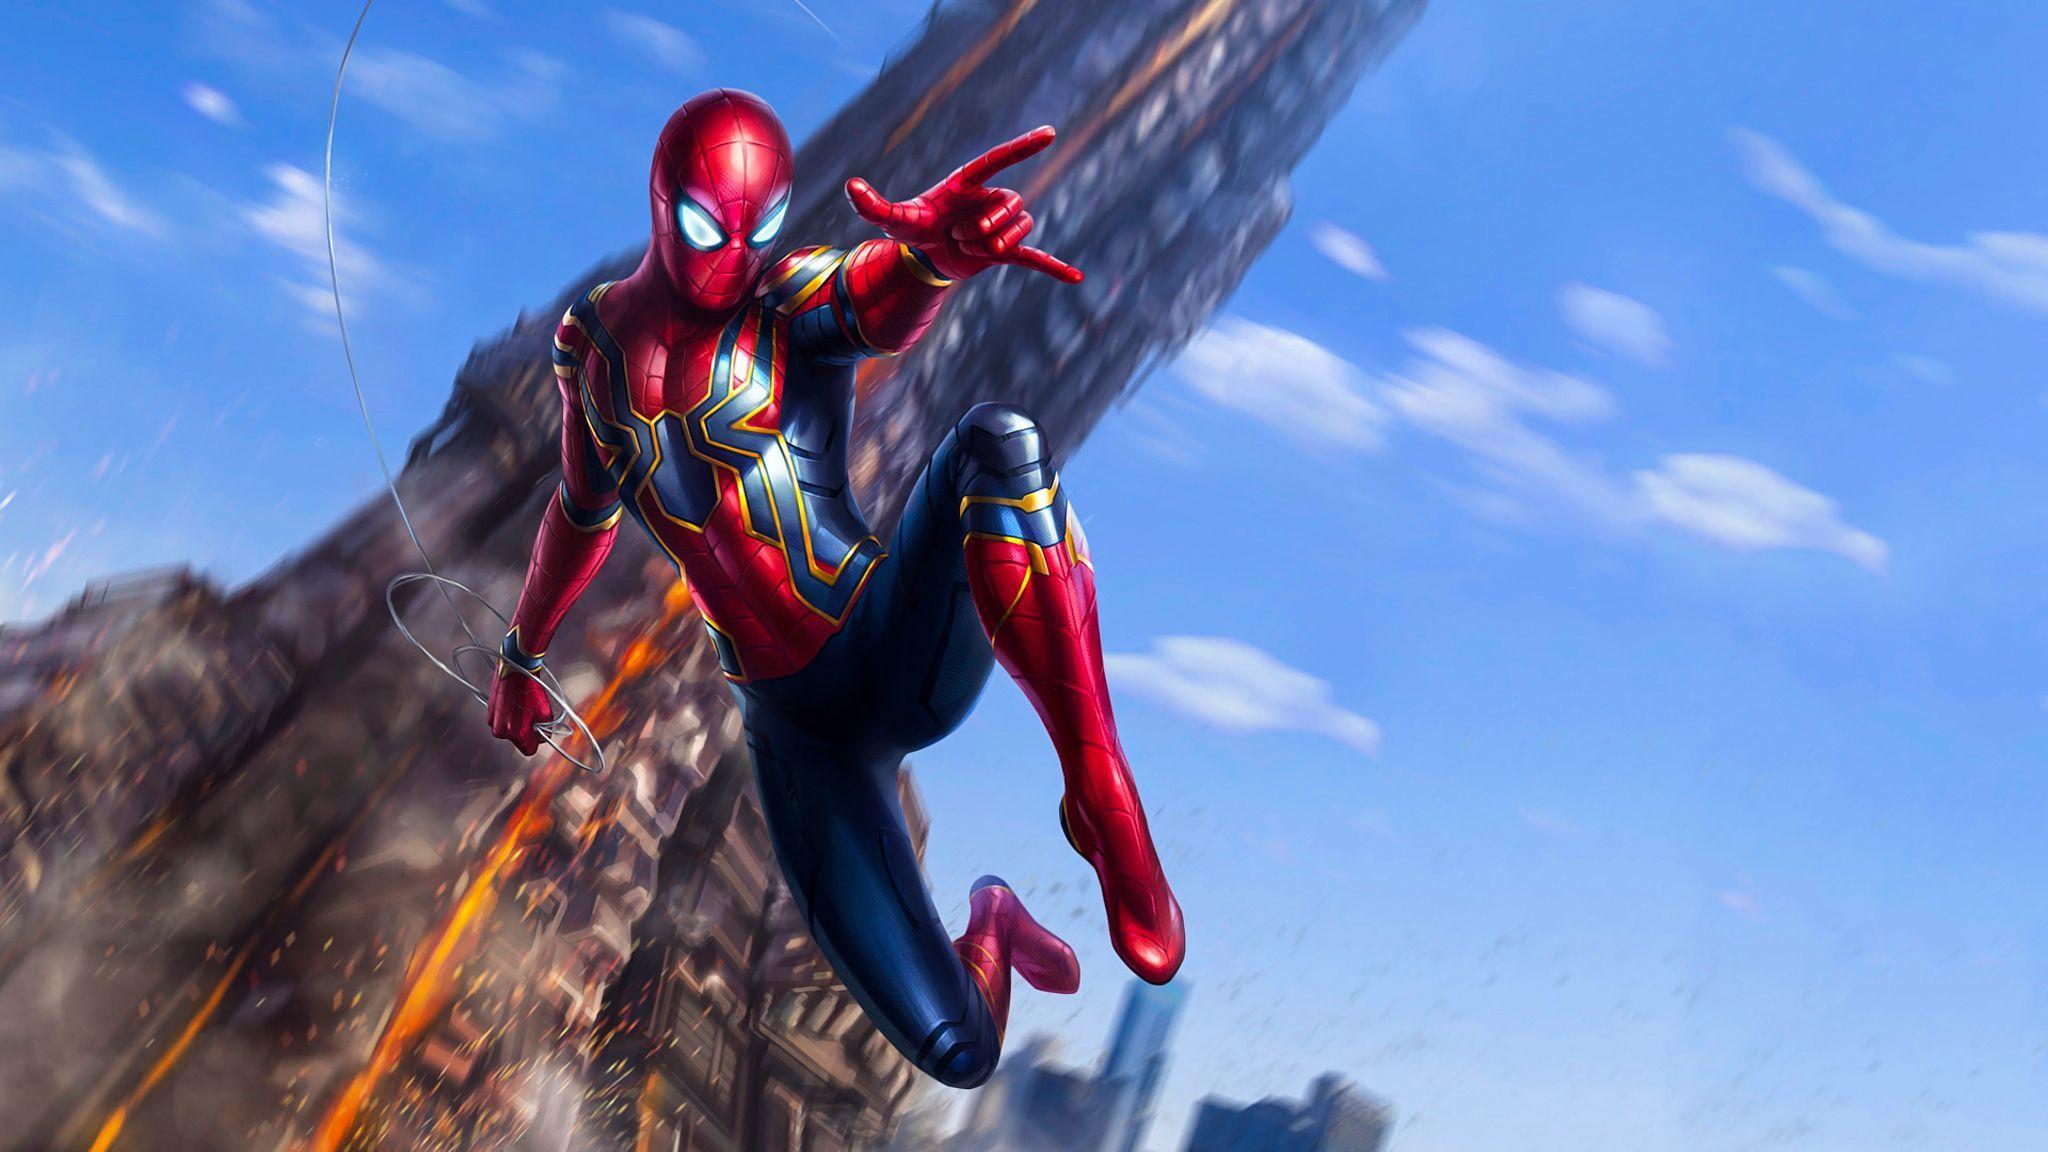 Spider-Man (PS4) HD Wallpapers | Spiderman, Spiderman ps4 wallpaper, Marvel  spiderman